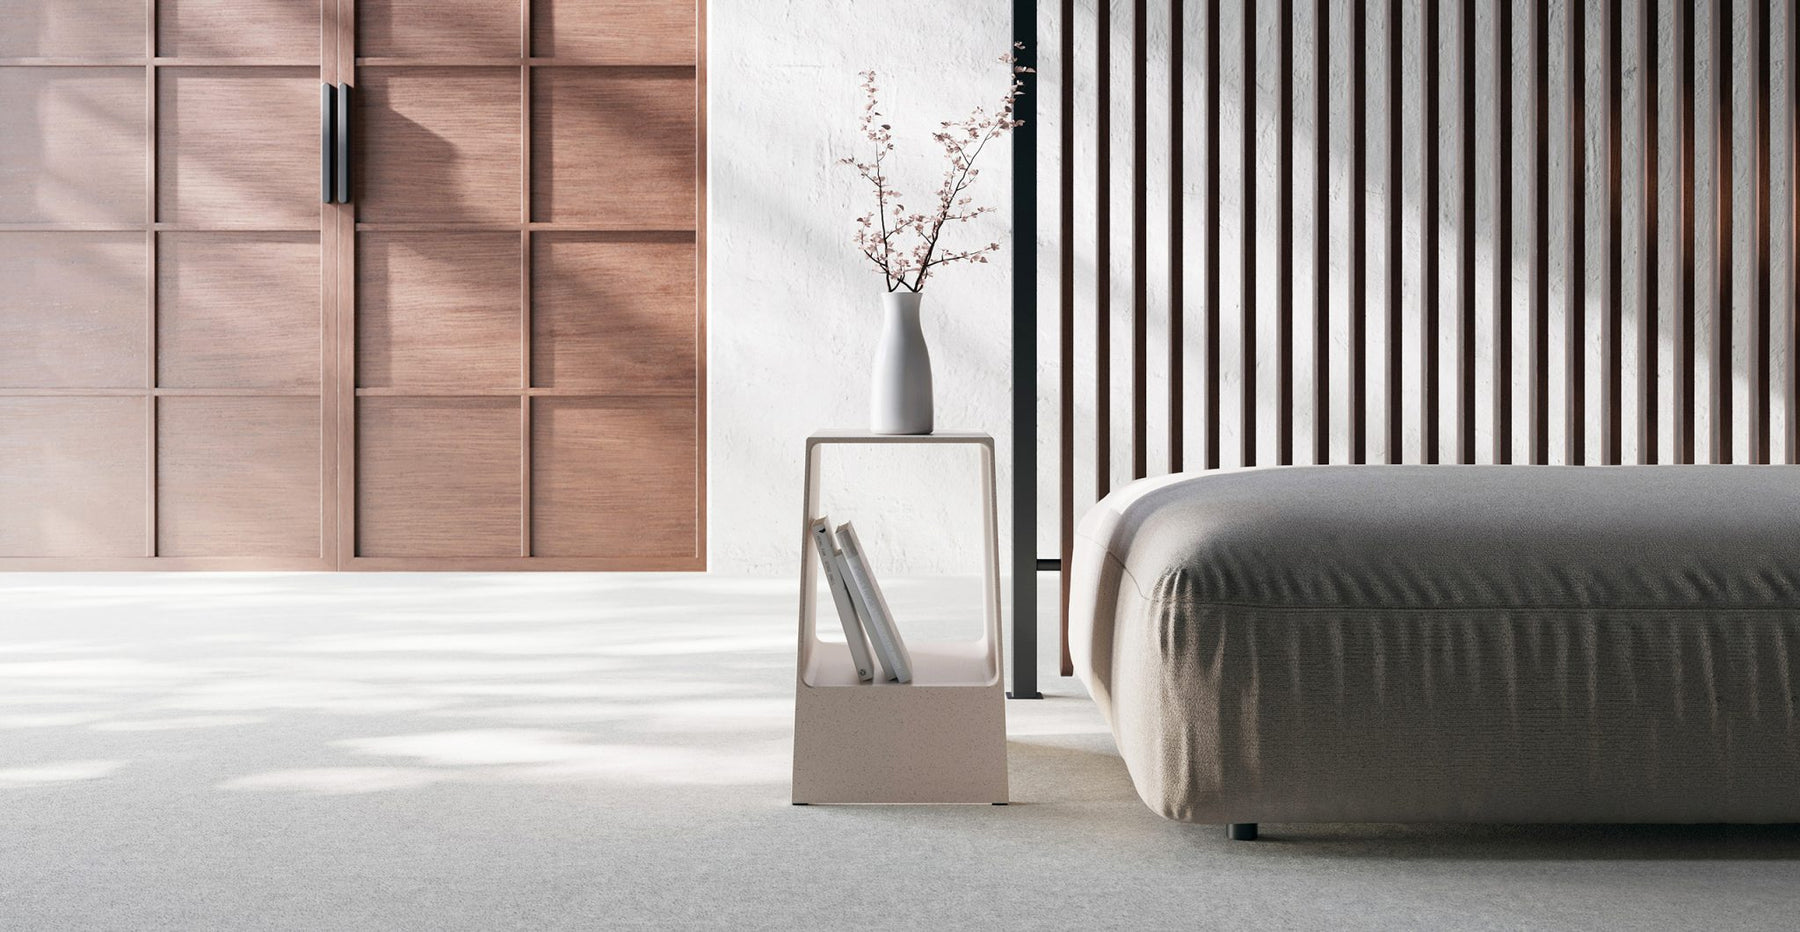 Tomo collection by TOOU is incredibly light and adaptable, it is made in polypropylene and recycled waste materials with low environmental impact.